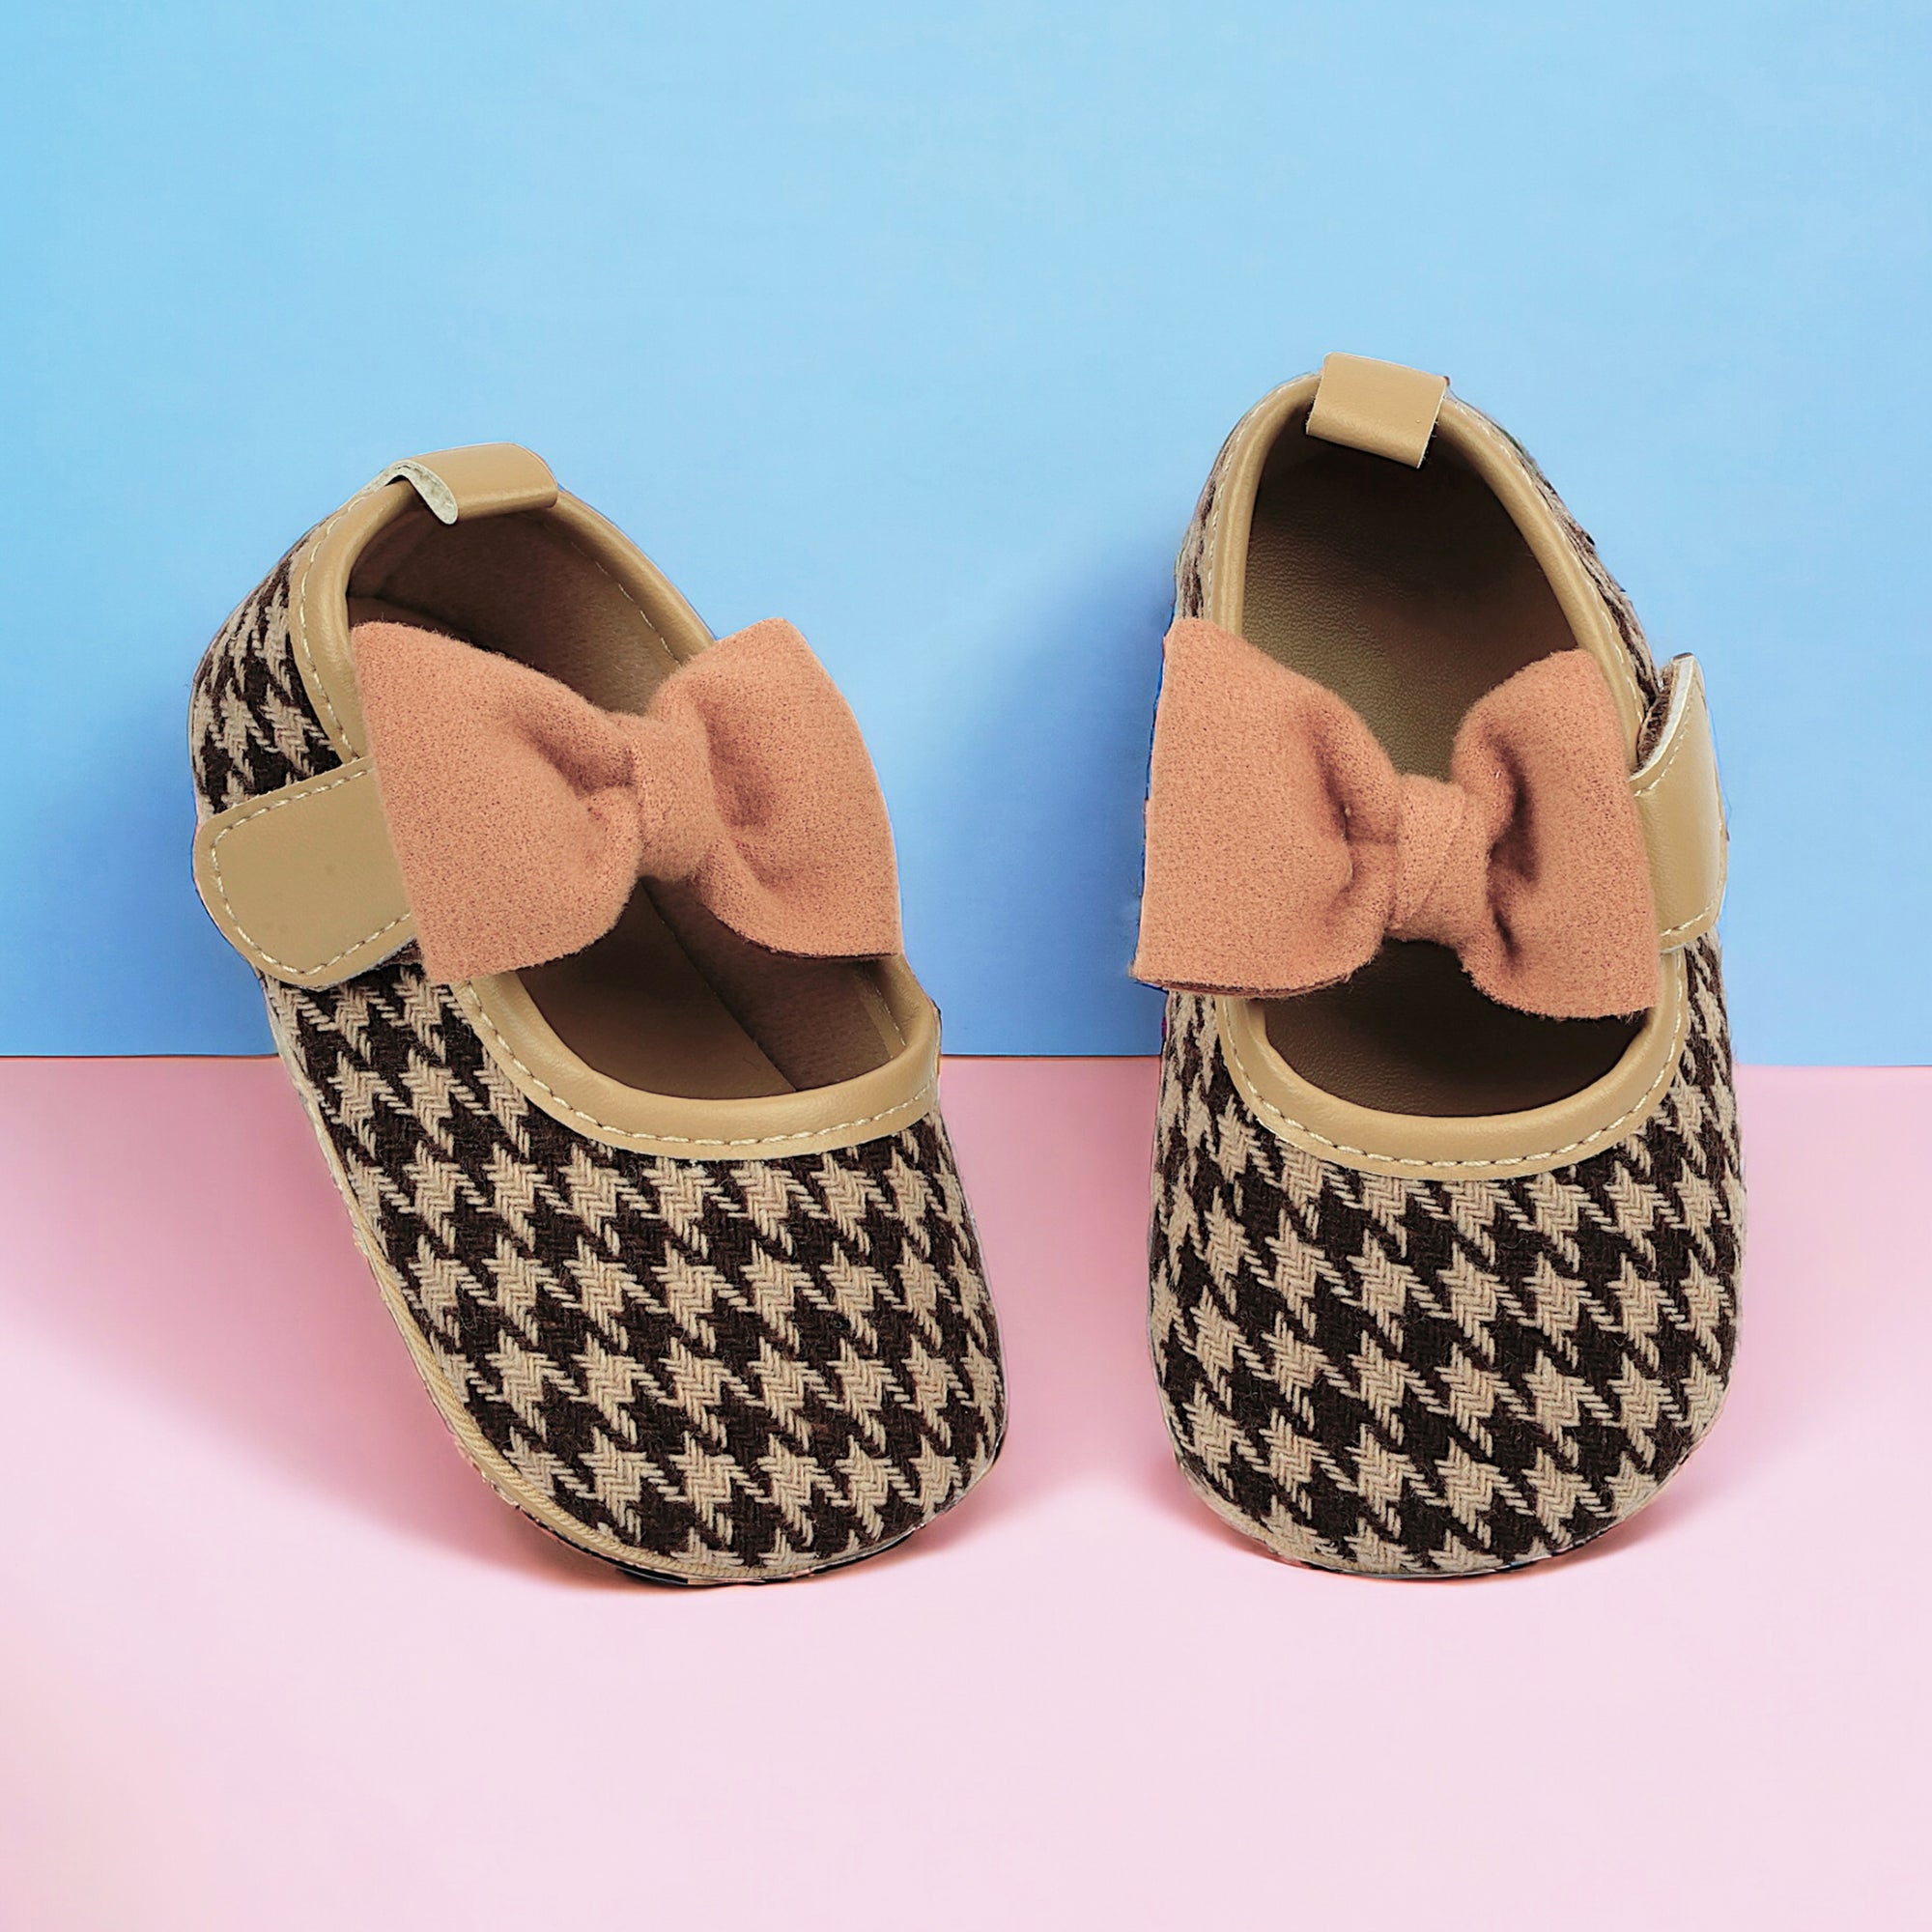 Baby Moo Houndstooth Print with Bow Velcro Strap Anti-Skid Ballerina Booties - Brown